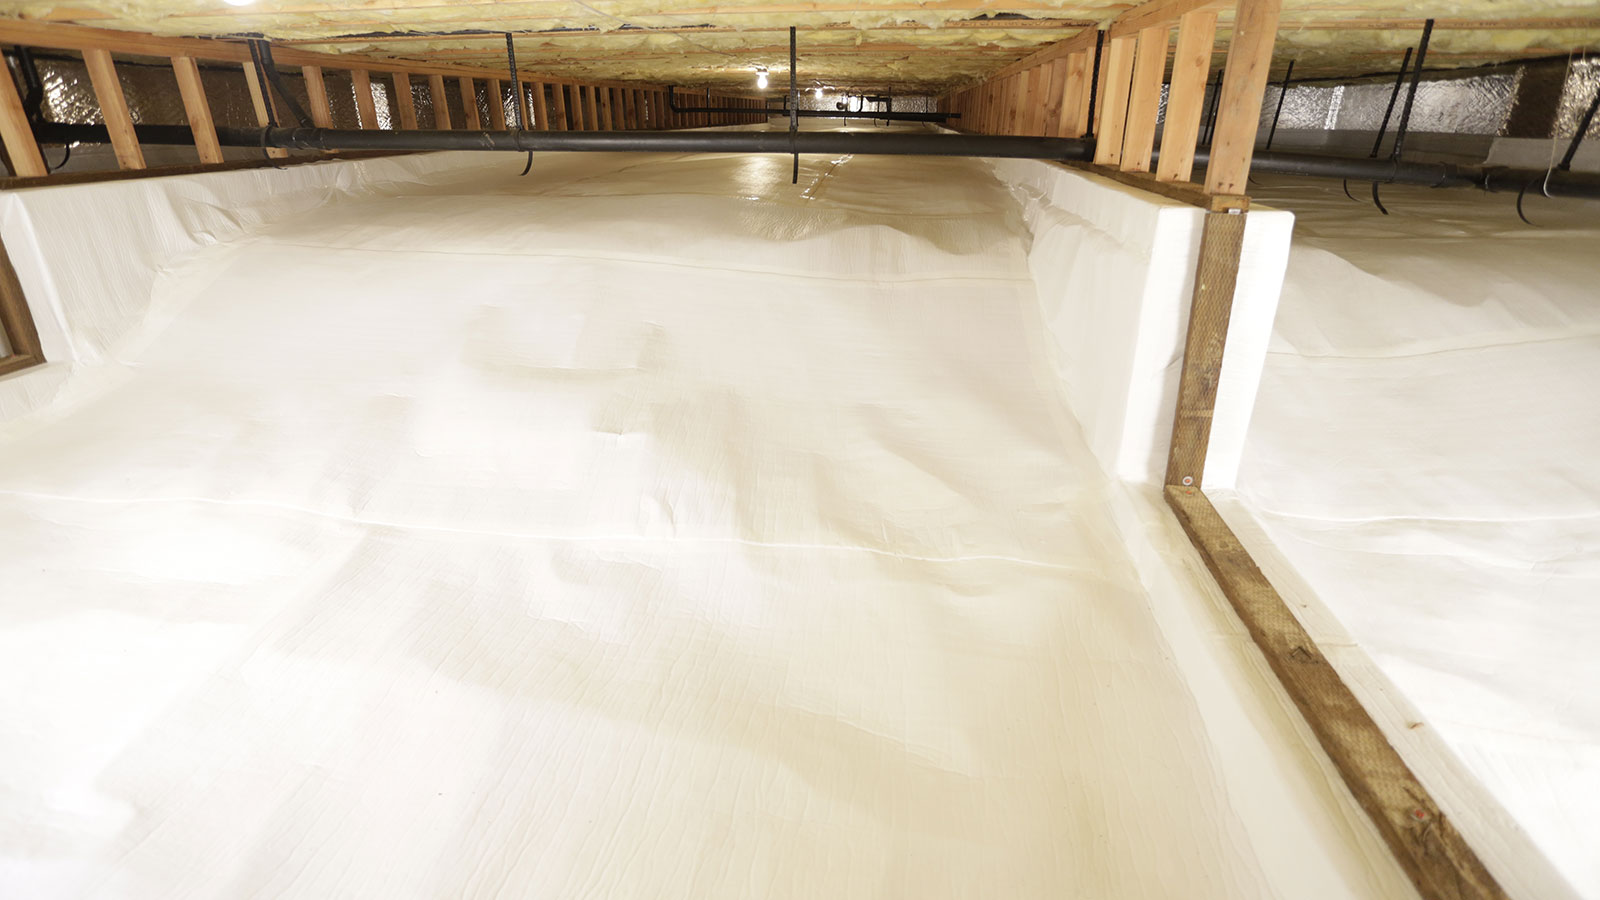 Crawl space foundation with a crawl space encapsulation system for energy efficiency